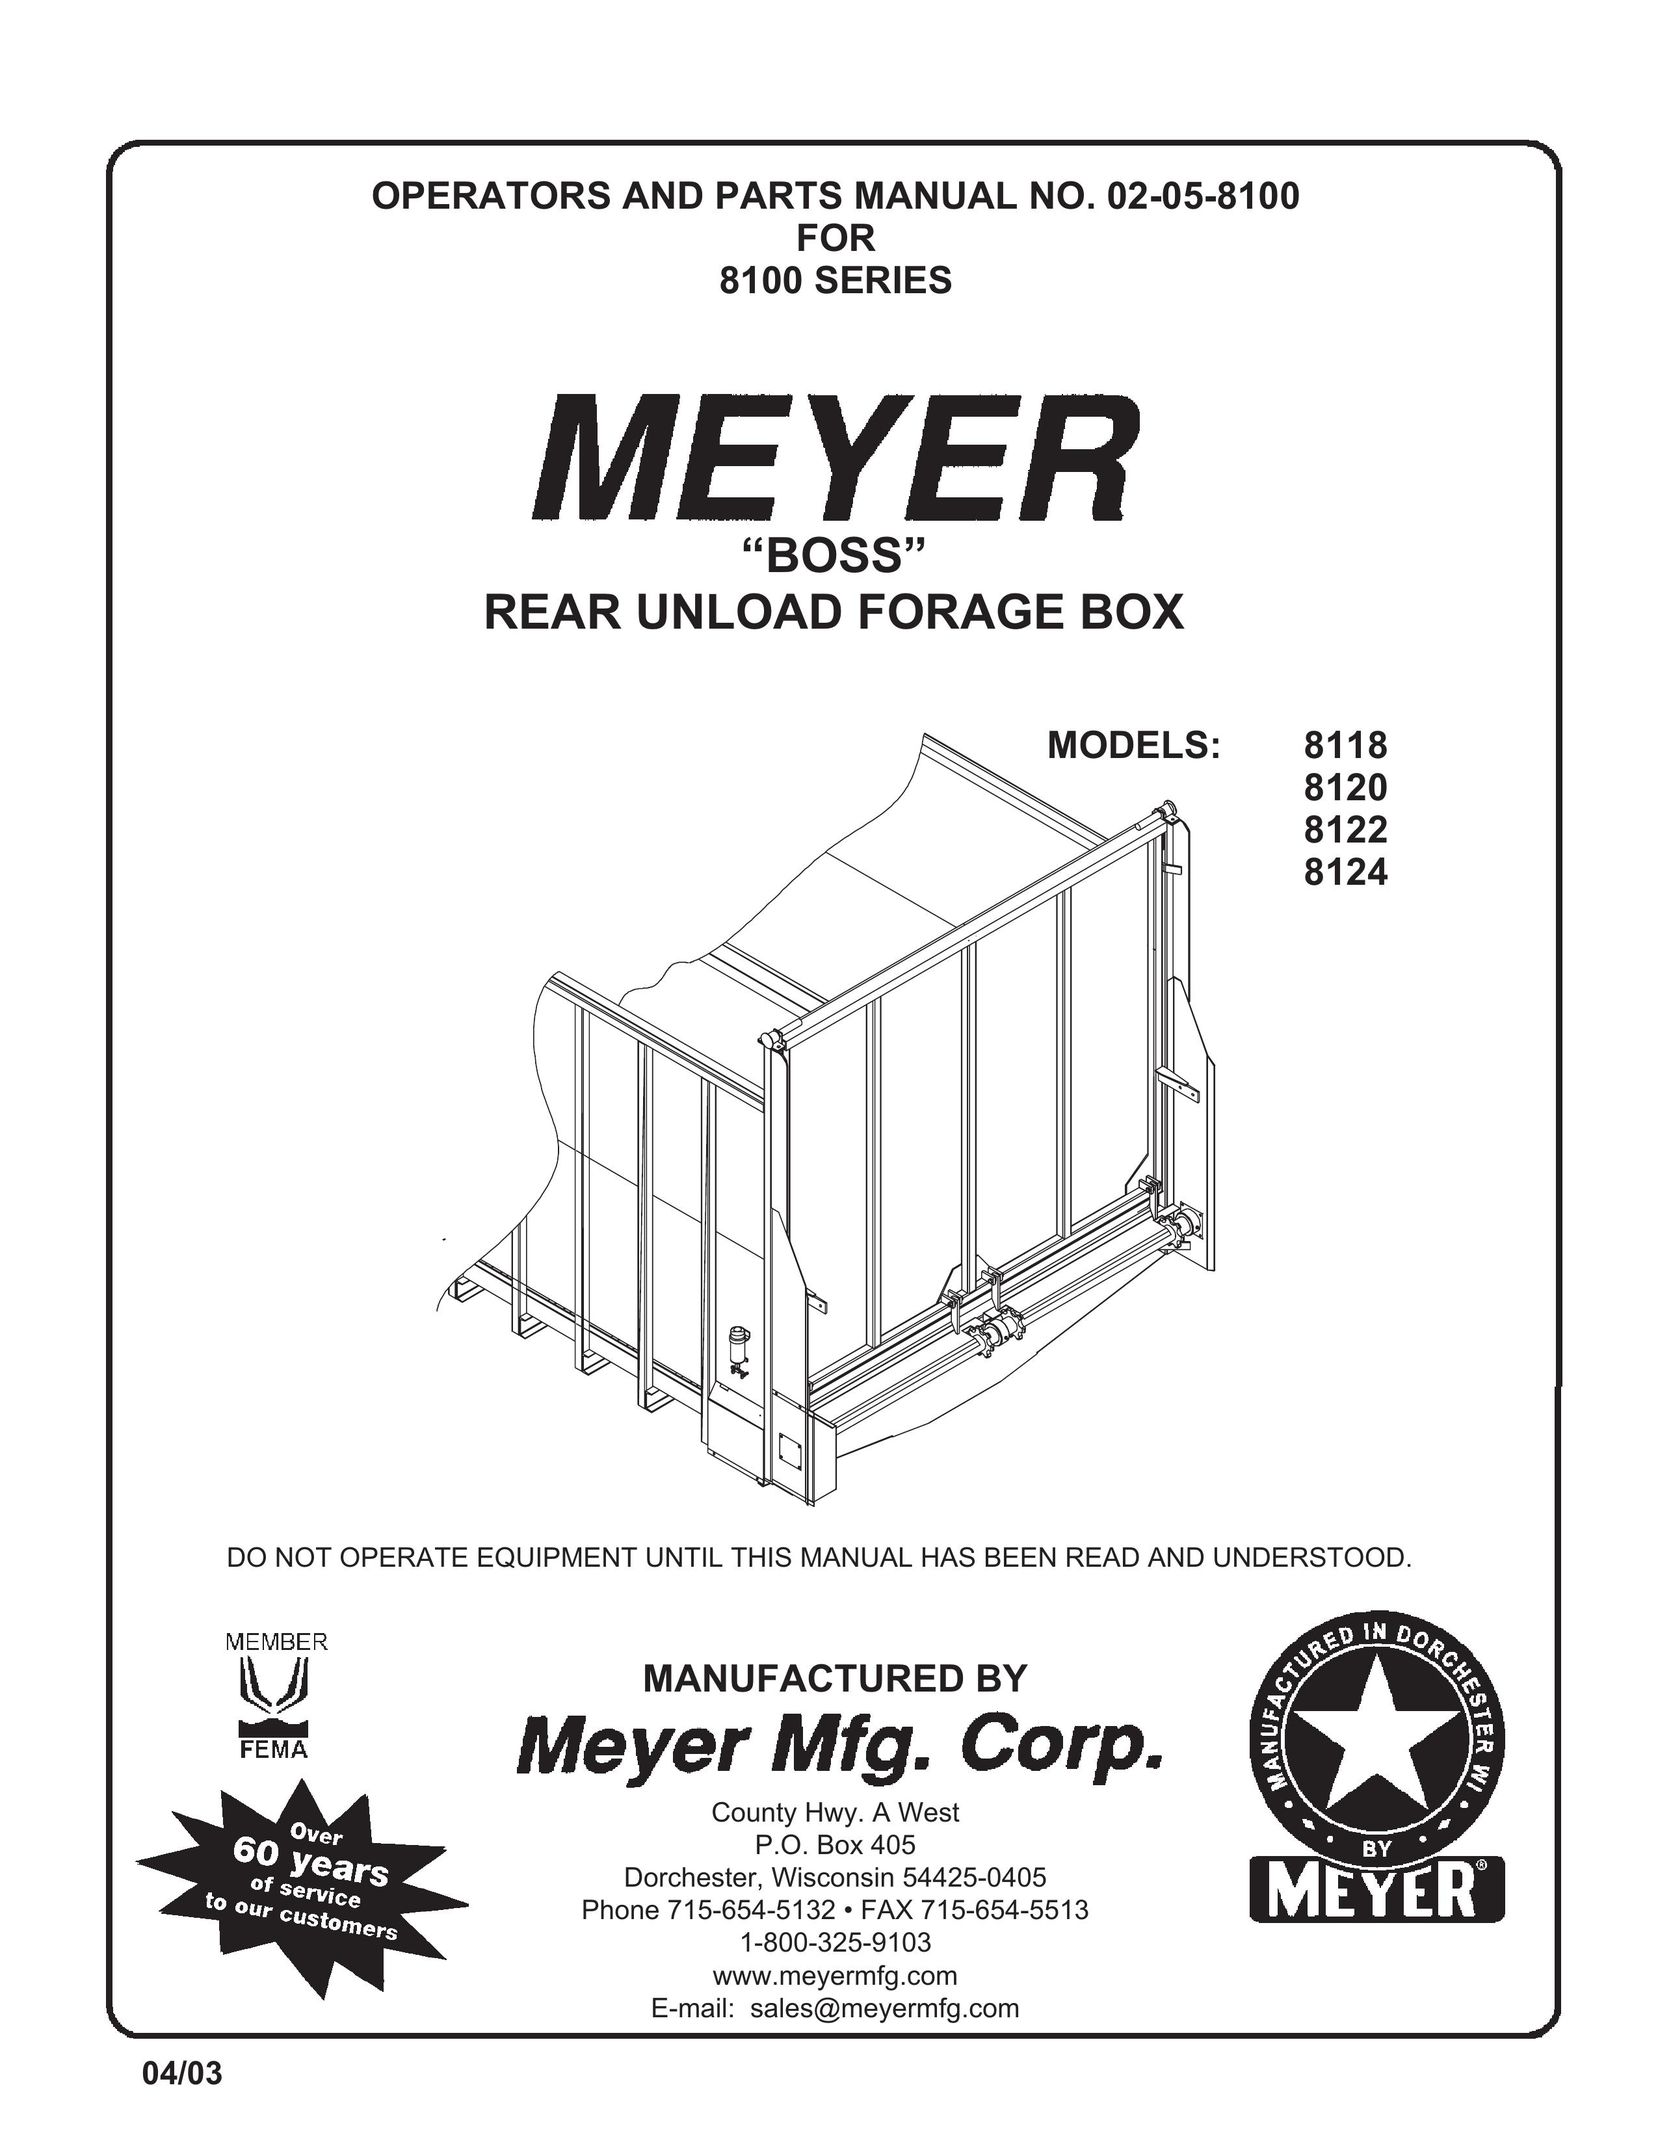 Meyer 8100 SERIES "BOSS" REAR UNLOAD FORAGE BOX Cable Box User Manual